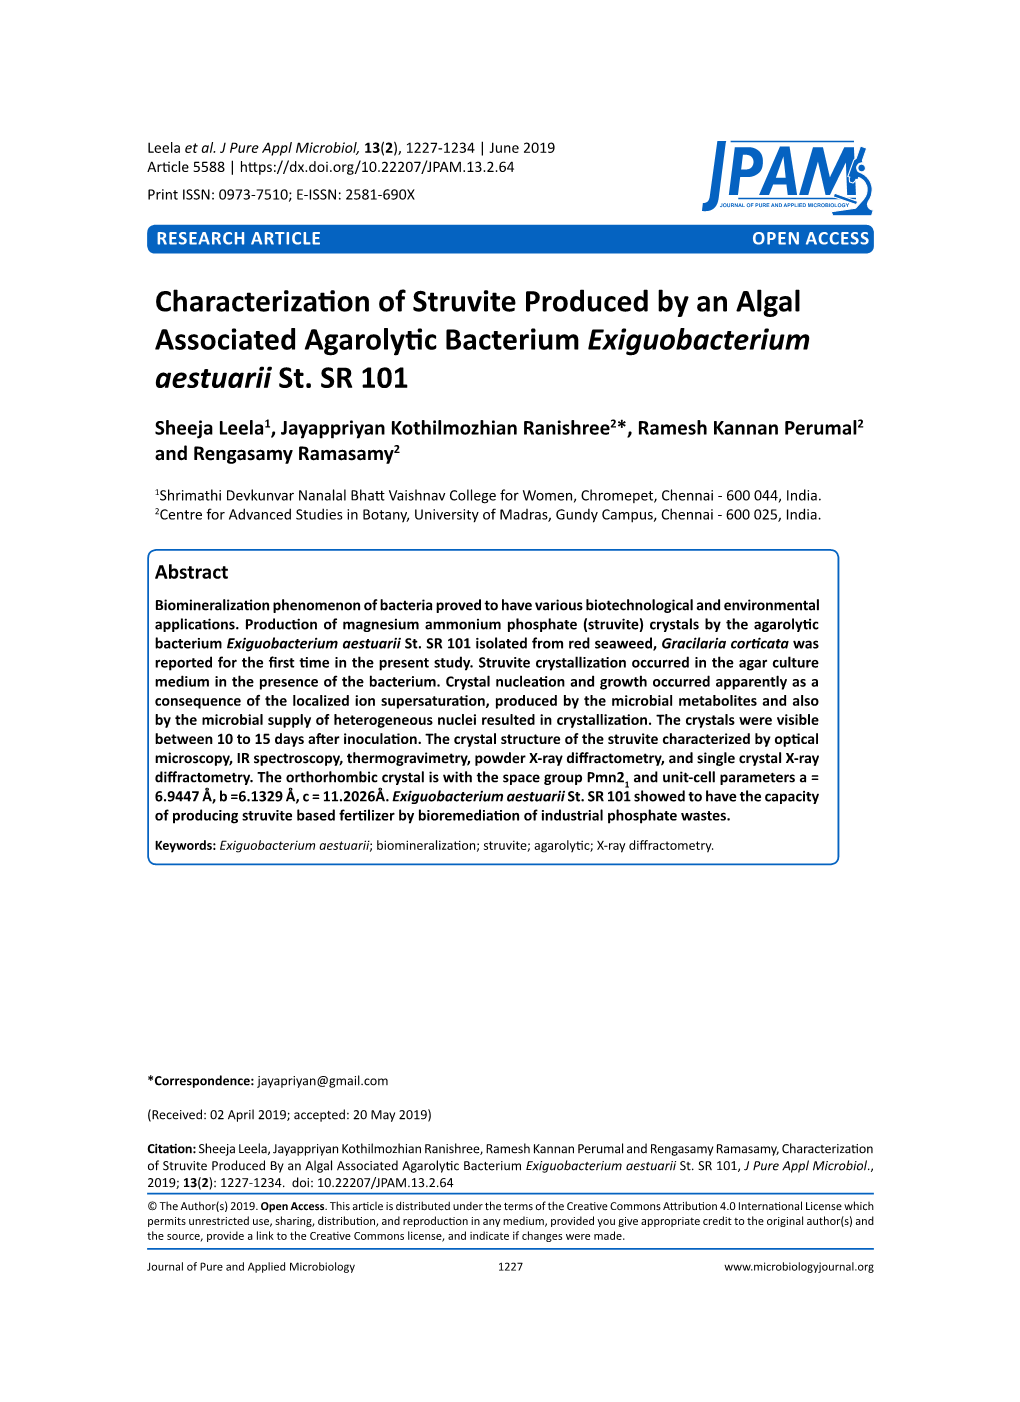 Characterization of Struvite Produced by an Algal Associated Agarolytic Bacterium Exiguobacterium Aestuarii St. SR 101